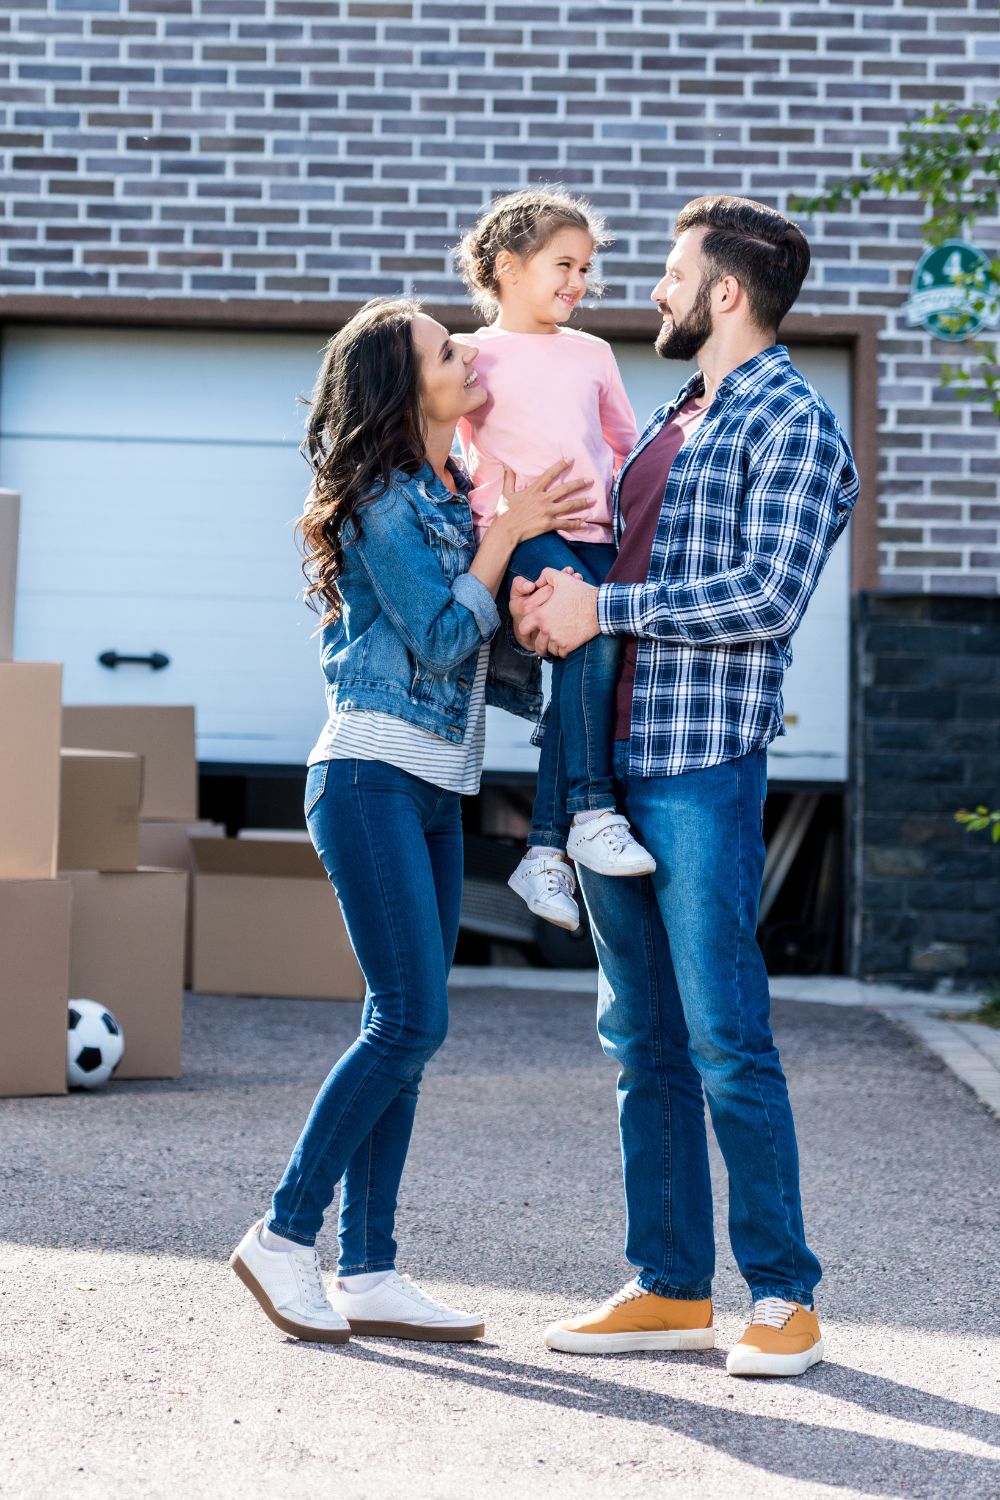 Tips to Help Make your Move Easier!